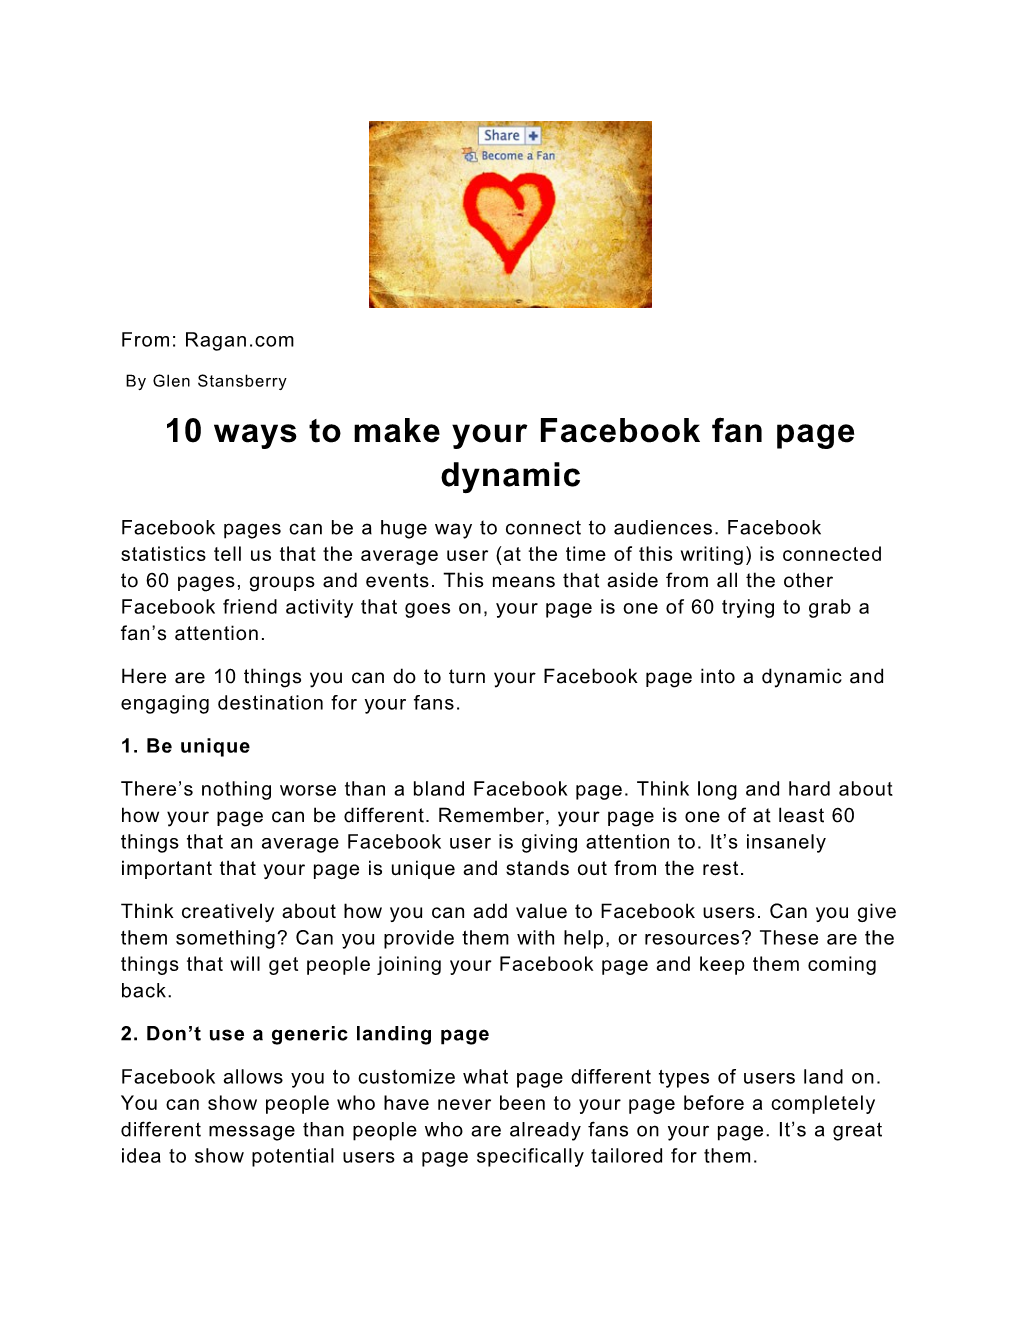 10 Ways to Make Your Facebook Fan Page Dynamic